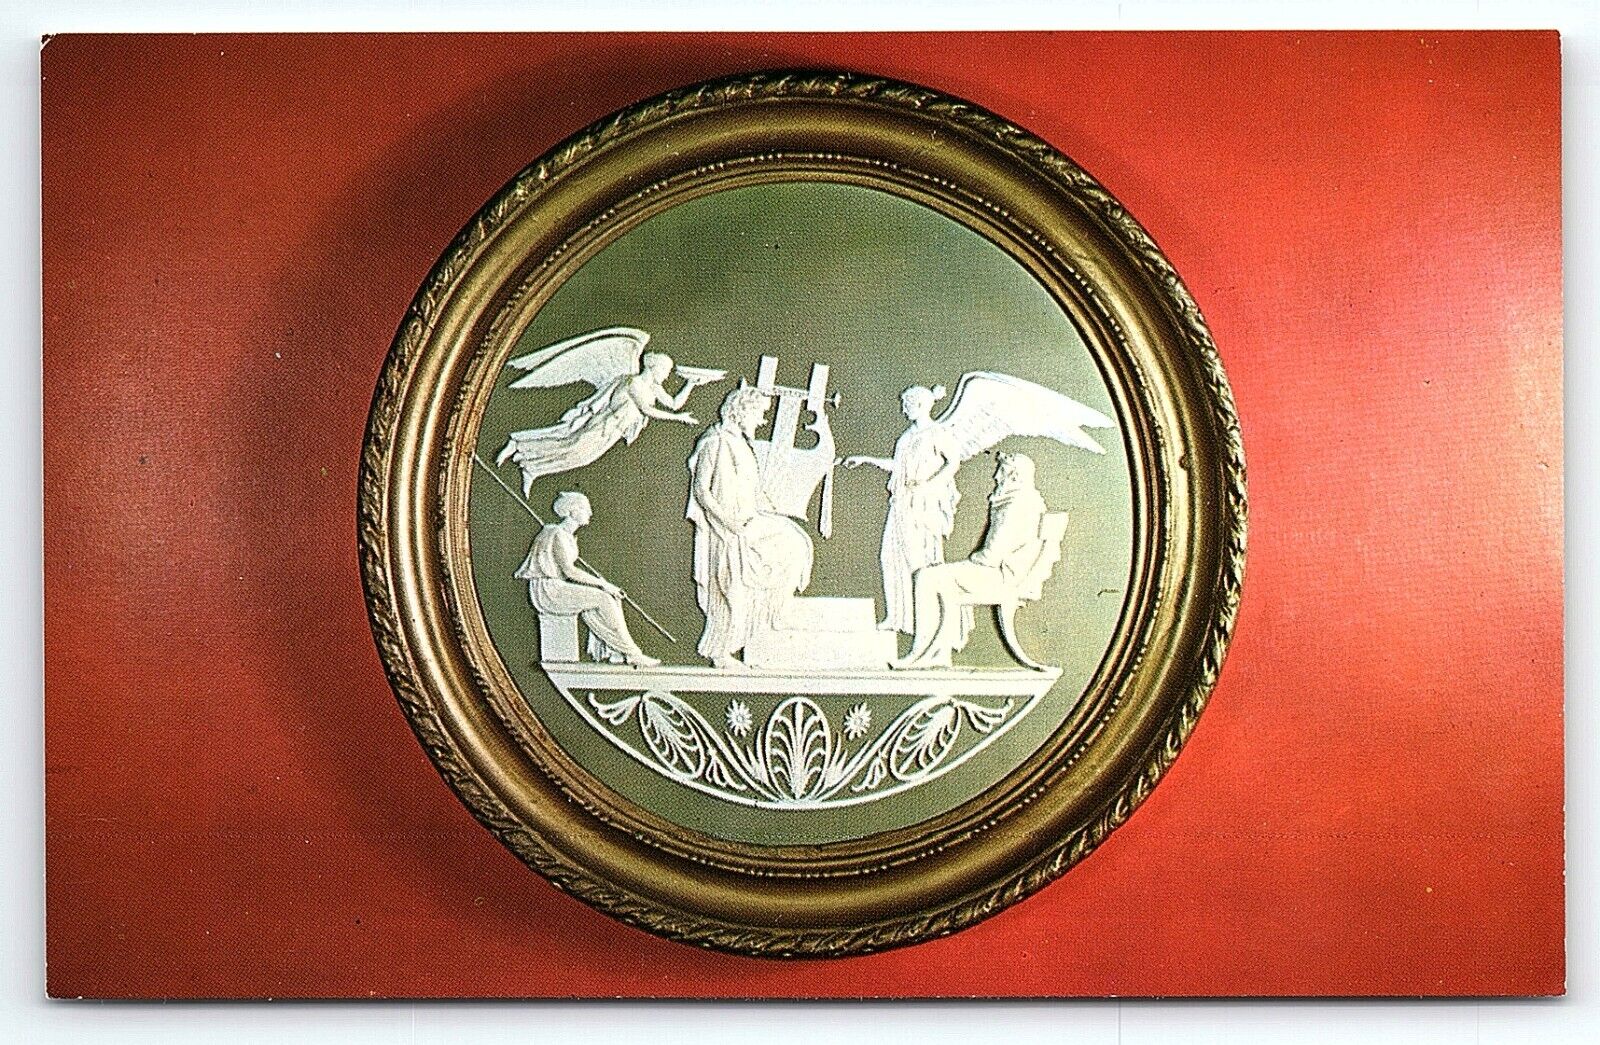 1960s MERION PA BUTEN MUSEUM OF WEDGWOOD CIRCULAR PLAQUE UNPOSTED POSTCARD P3660